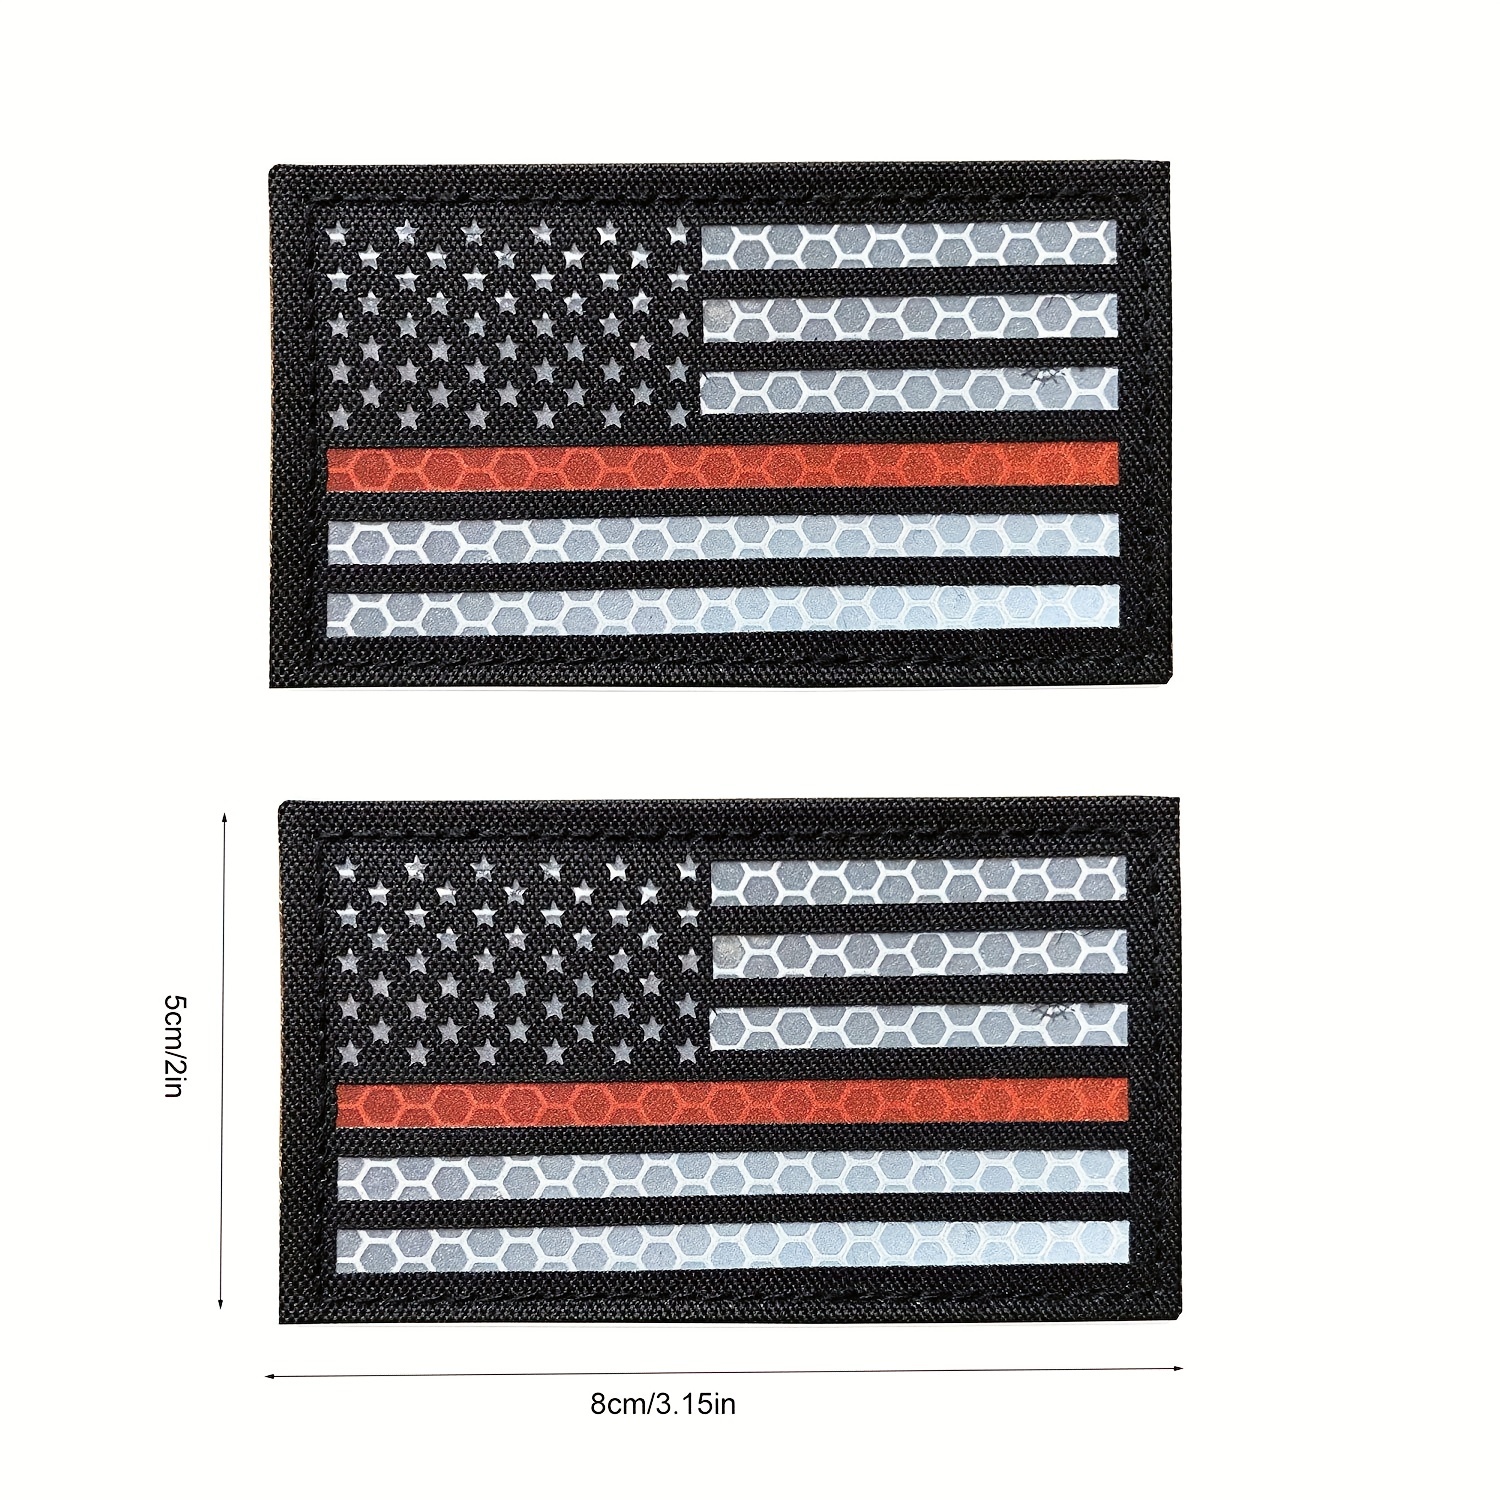 IR Patch Non-Covert: Printed US Flag: Choose Direction, Color